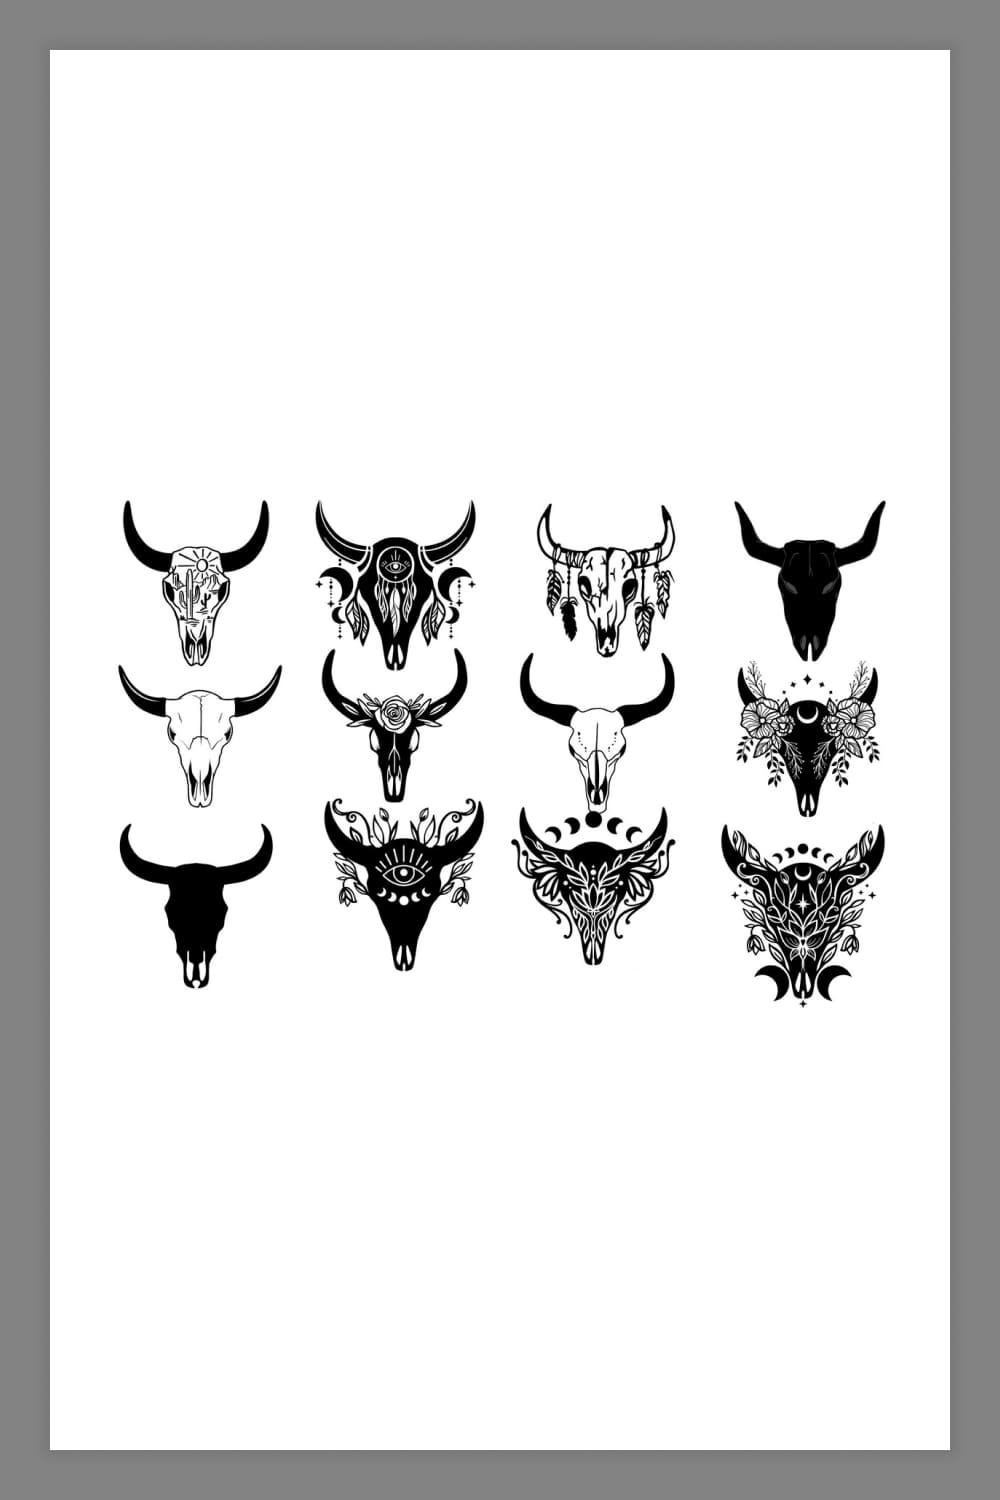 Collage of 12 Cow Skulls in different designs.